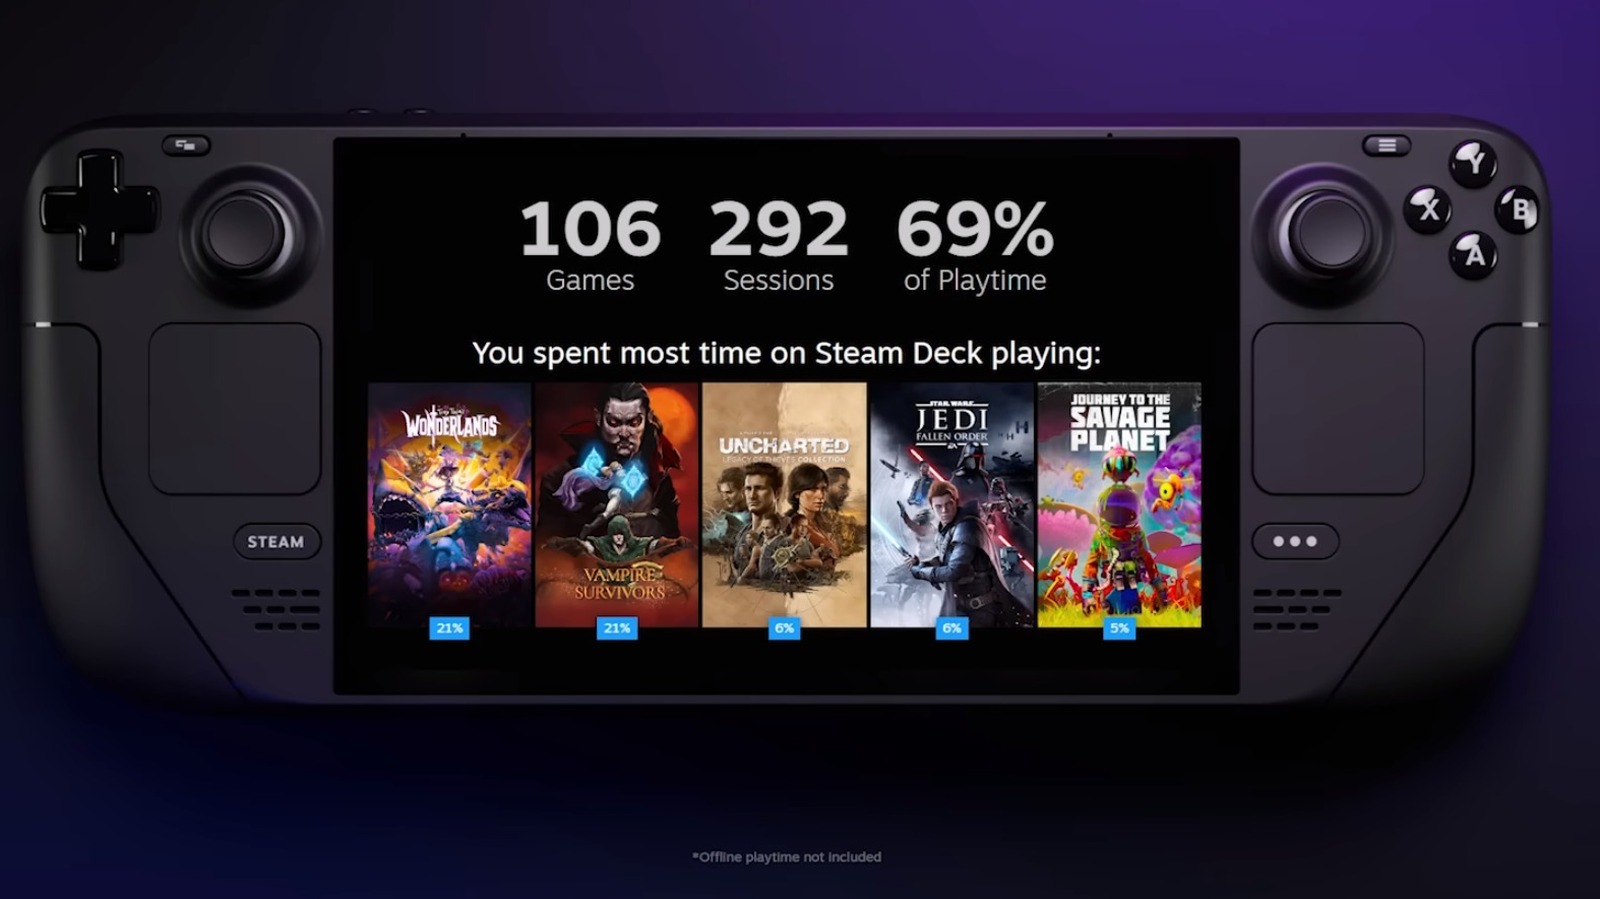 Here's How To Get Your 2022 Steam Replay And See What Games You Played